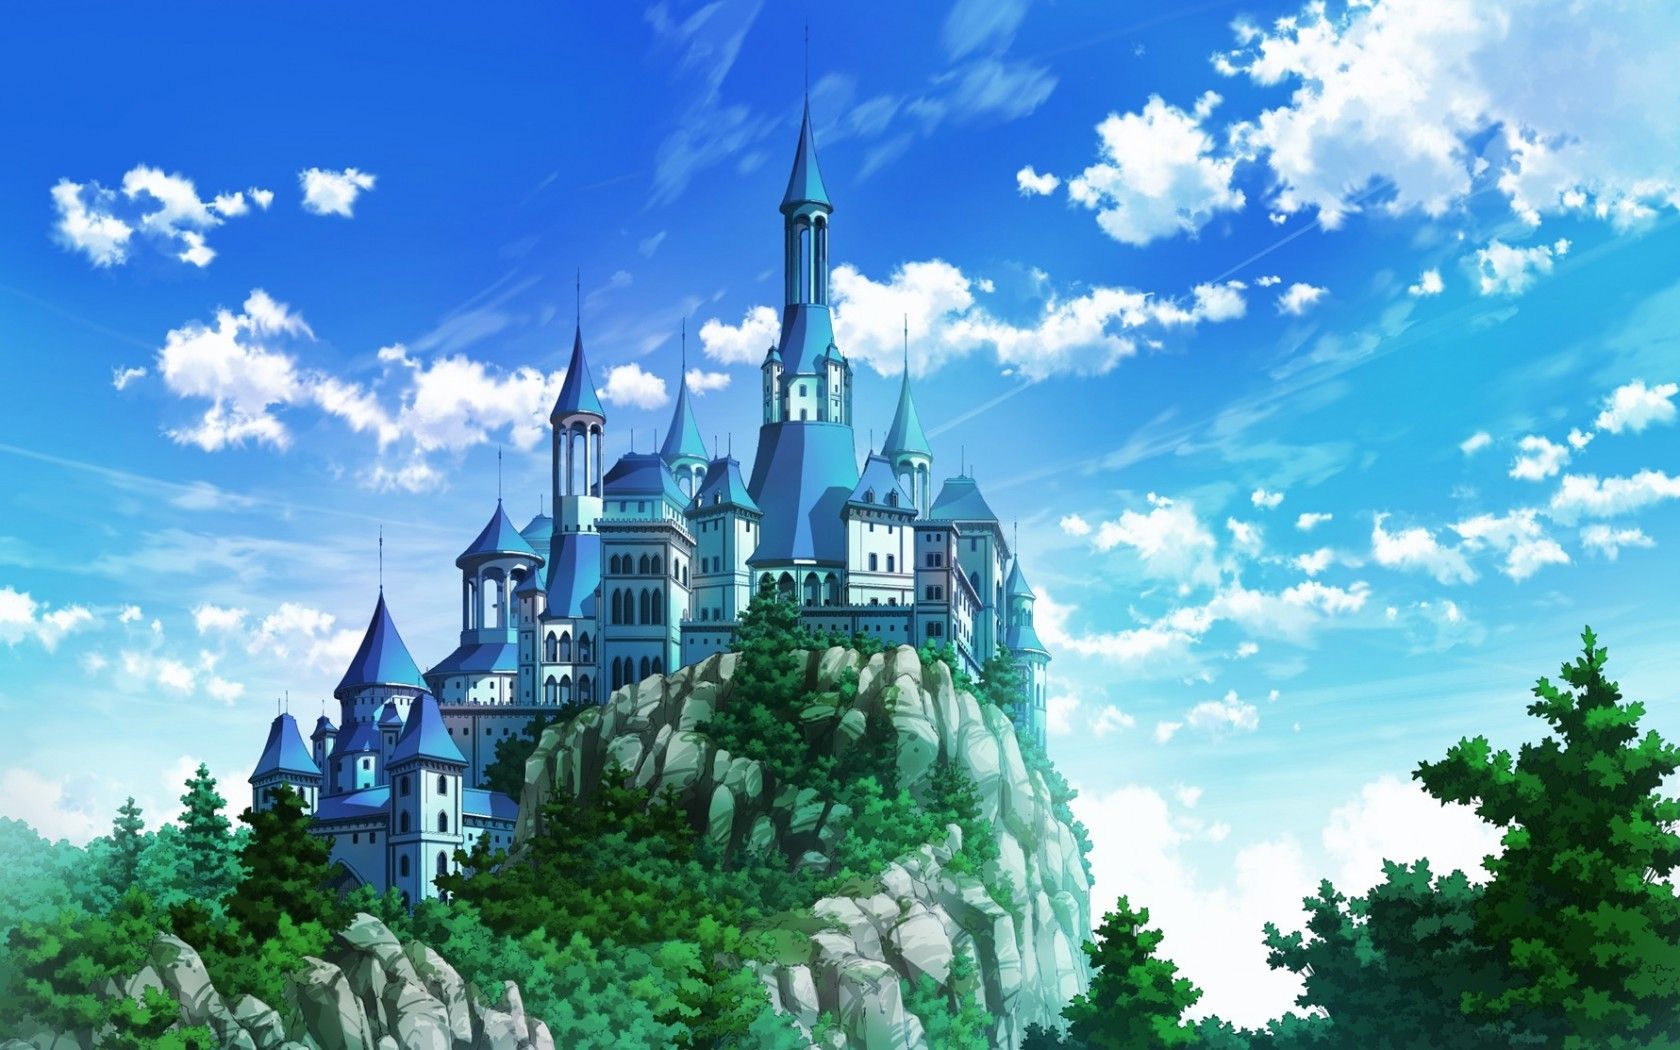 Anime Castle by Dannitolvl on DeviantArt